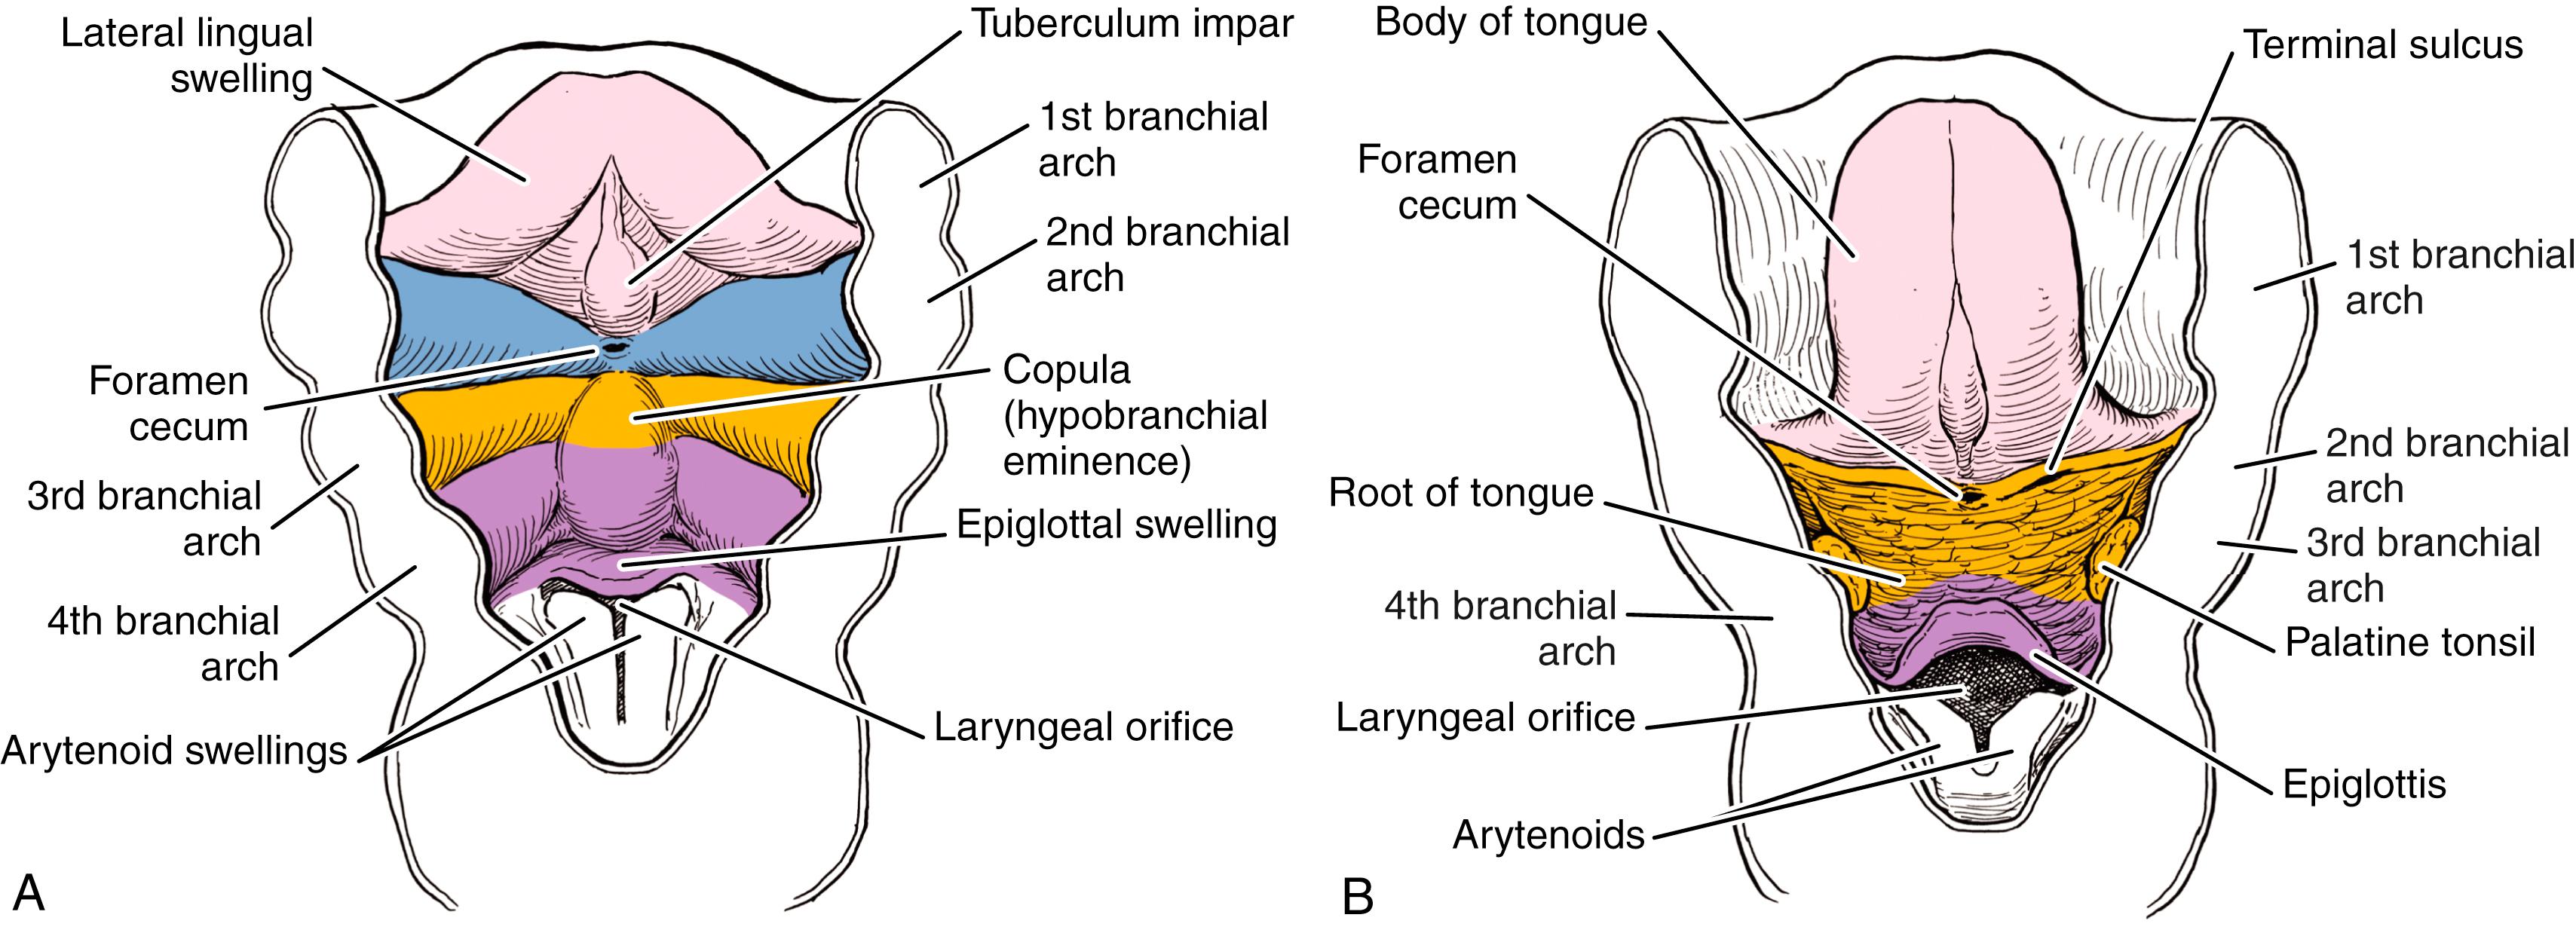 Fig. 23.7, Development of the tongue. (A) At weeks 4 to 5, the first arch forms the medial tuberculum impar and the lateral lingual swellings. The second, third, and fourth arches form the copula, or hypobranchial eminence. (B) The first arch forms the anterior tongue, whereas the third arch primarily contributes to the posterior tongue. The fourth arch forms the root of the tongue and epiglottis.